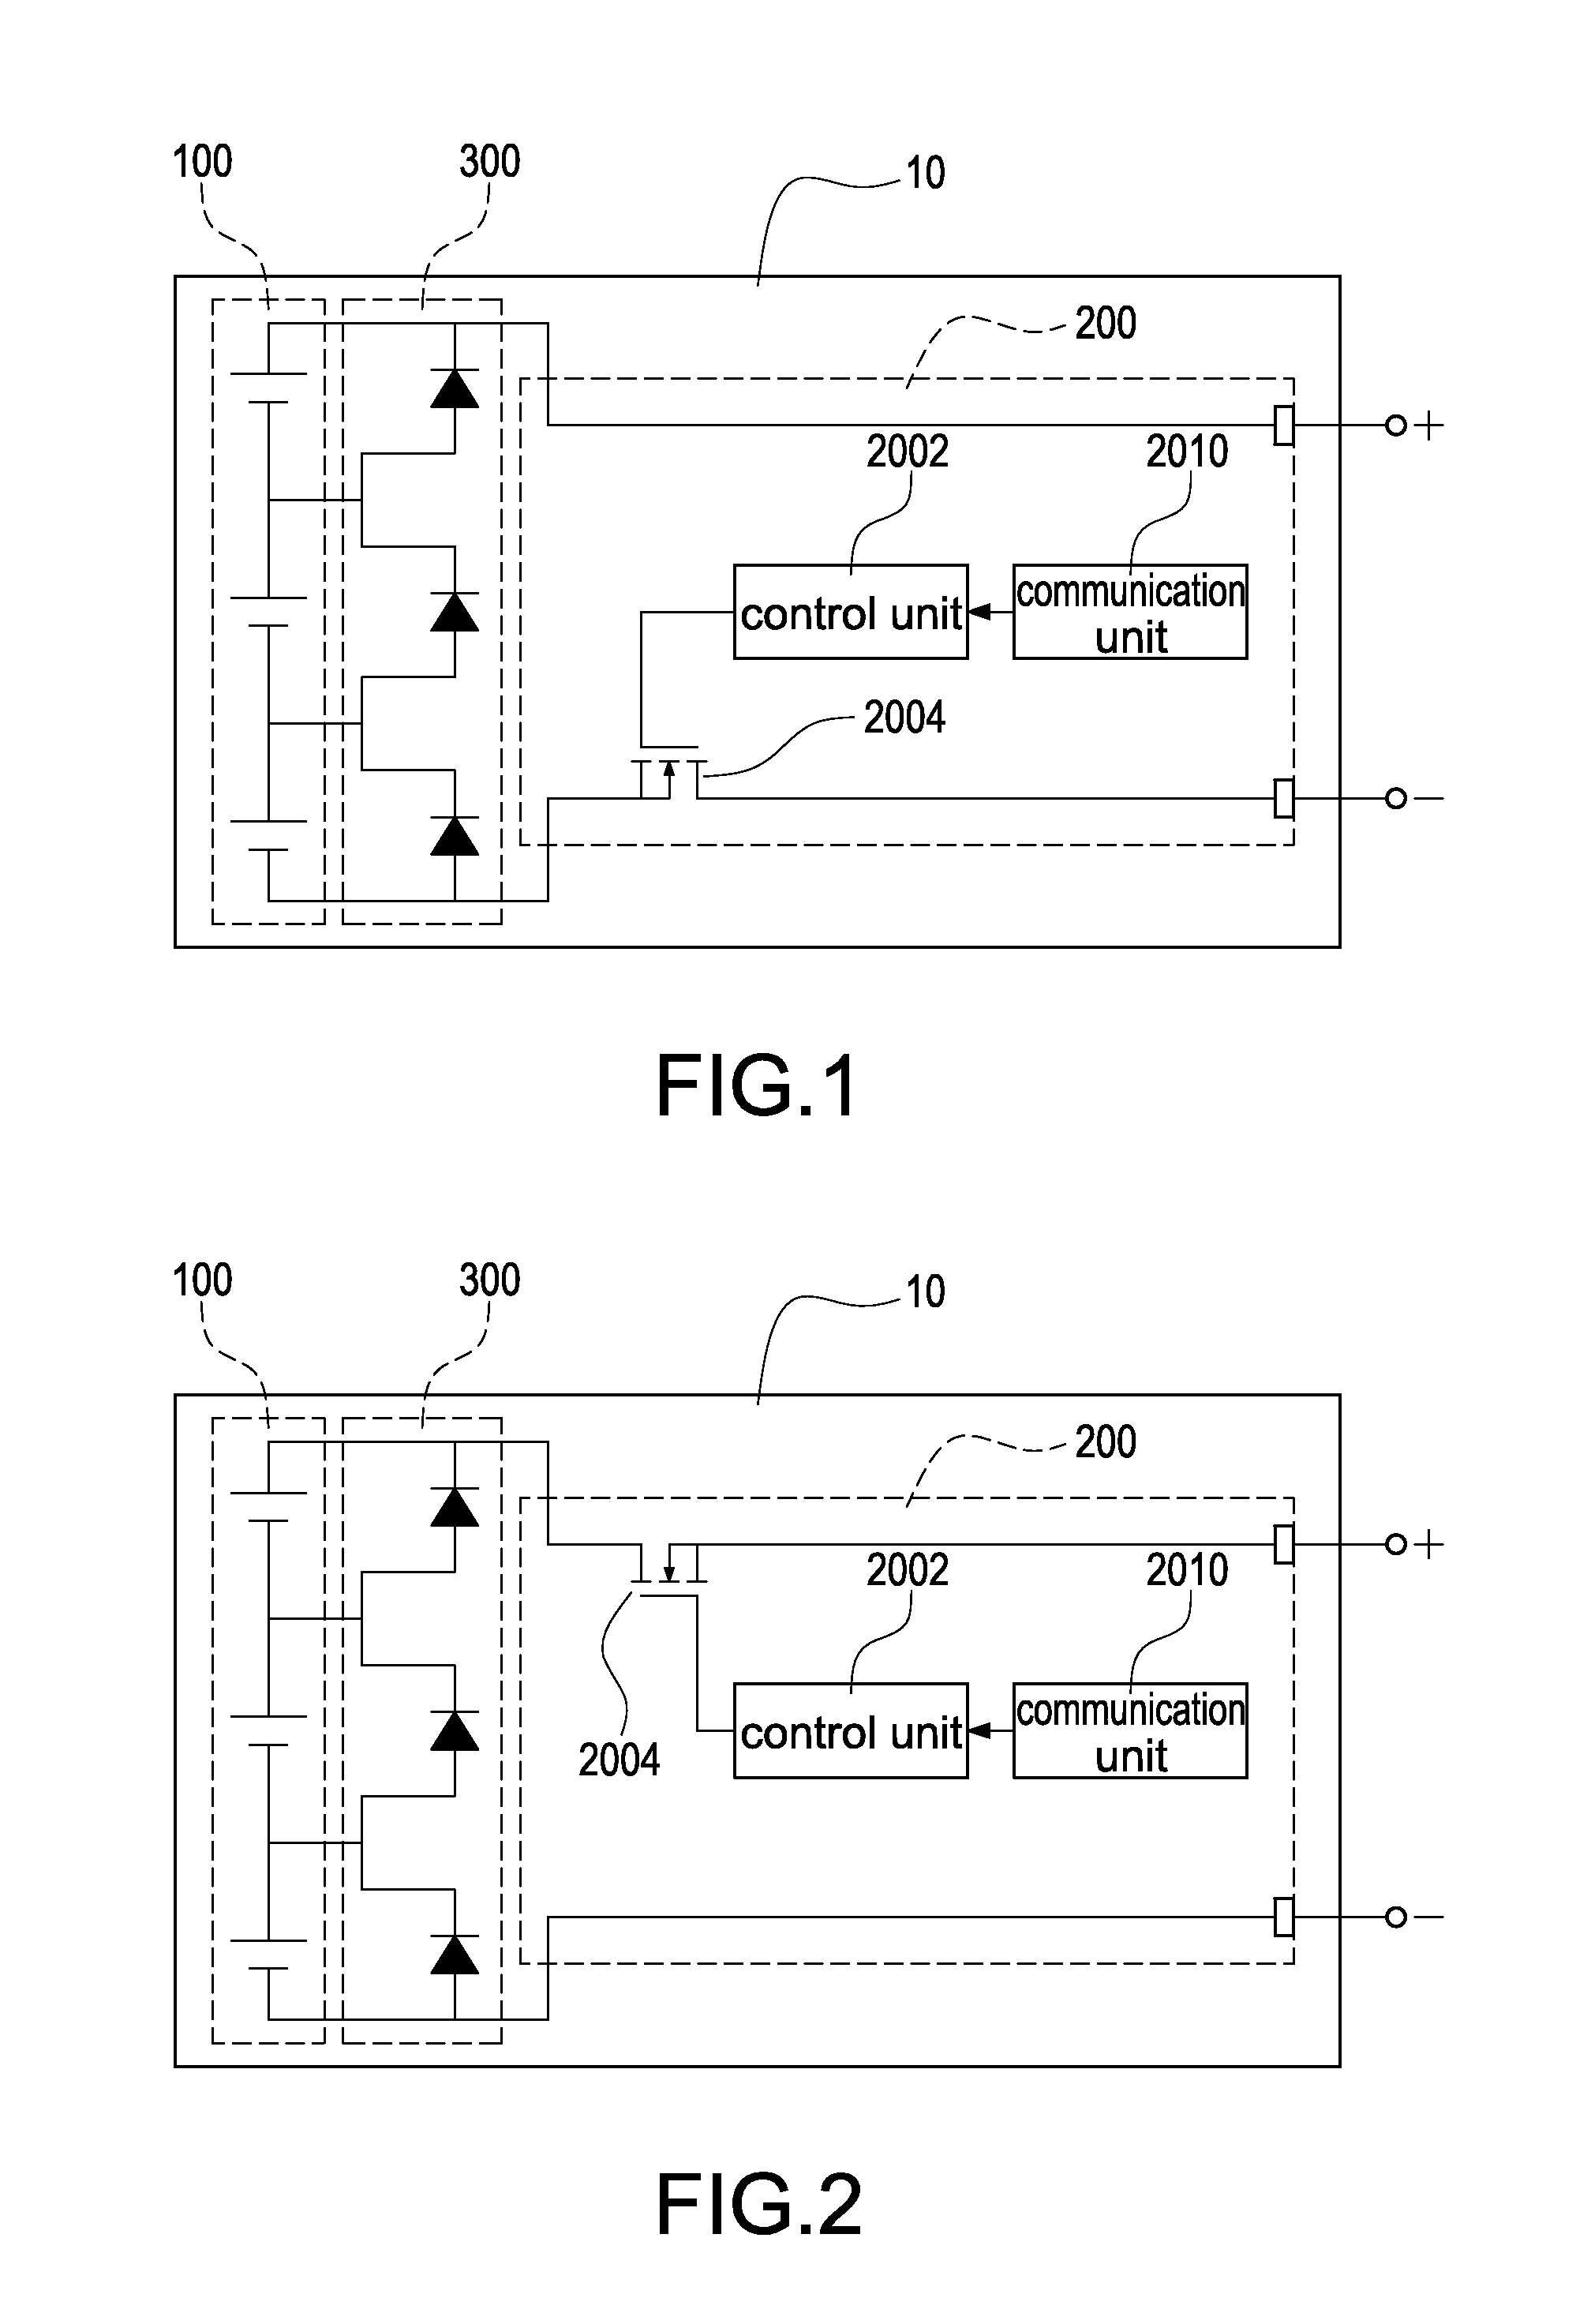 Photovoltaic power system with generation modules